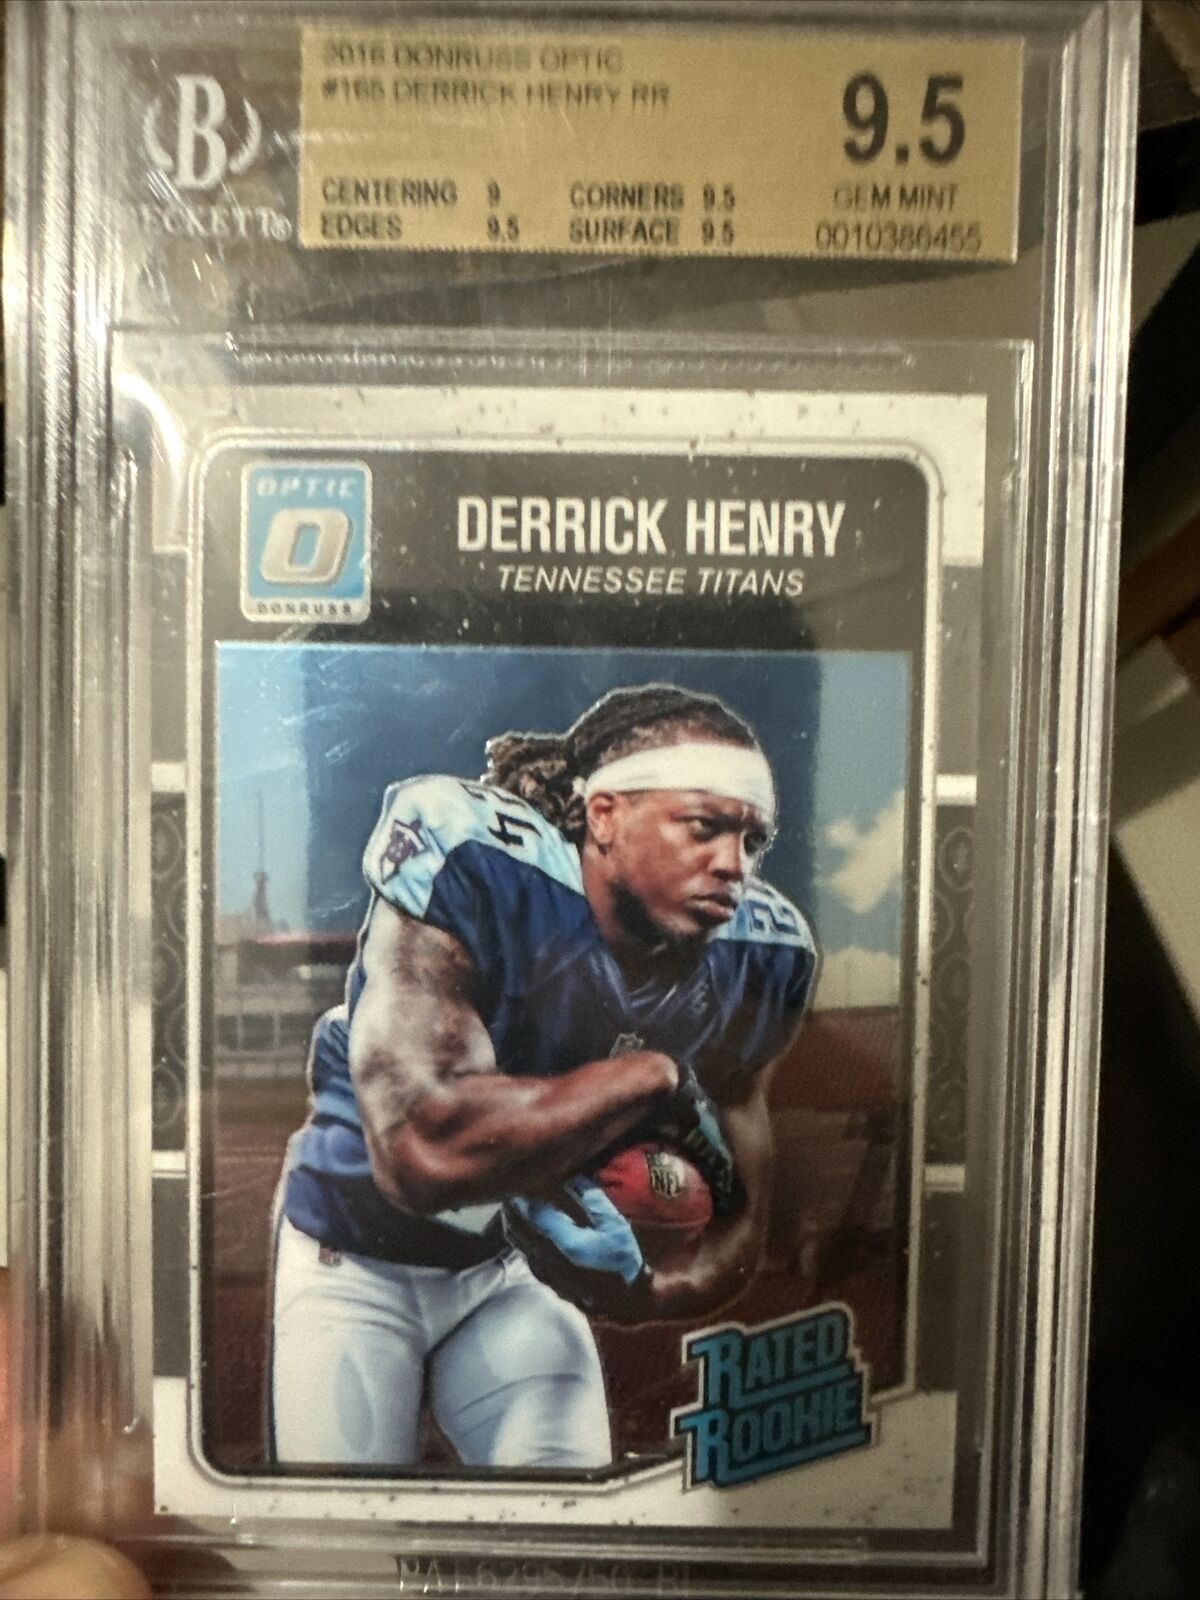 2016 Donruss Optic - Rated Rookie #165 Derrick Henry (RC) BGS 9.5